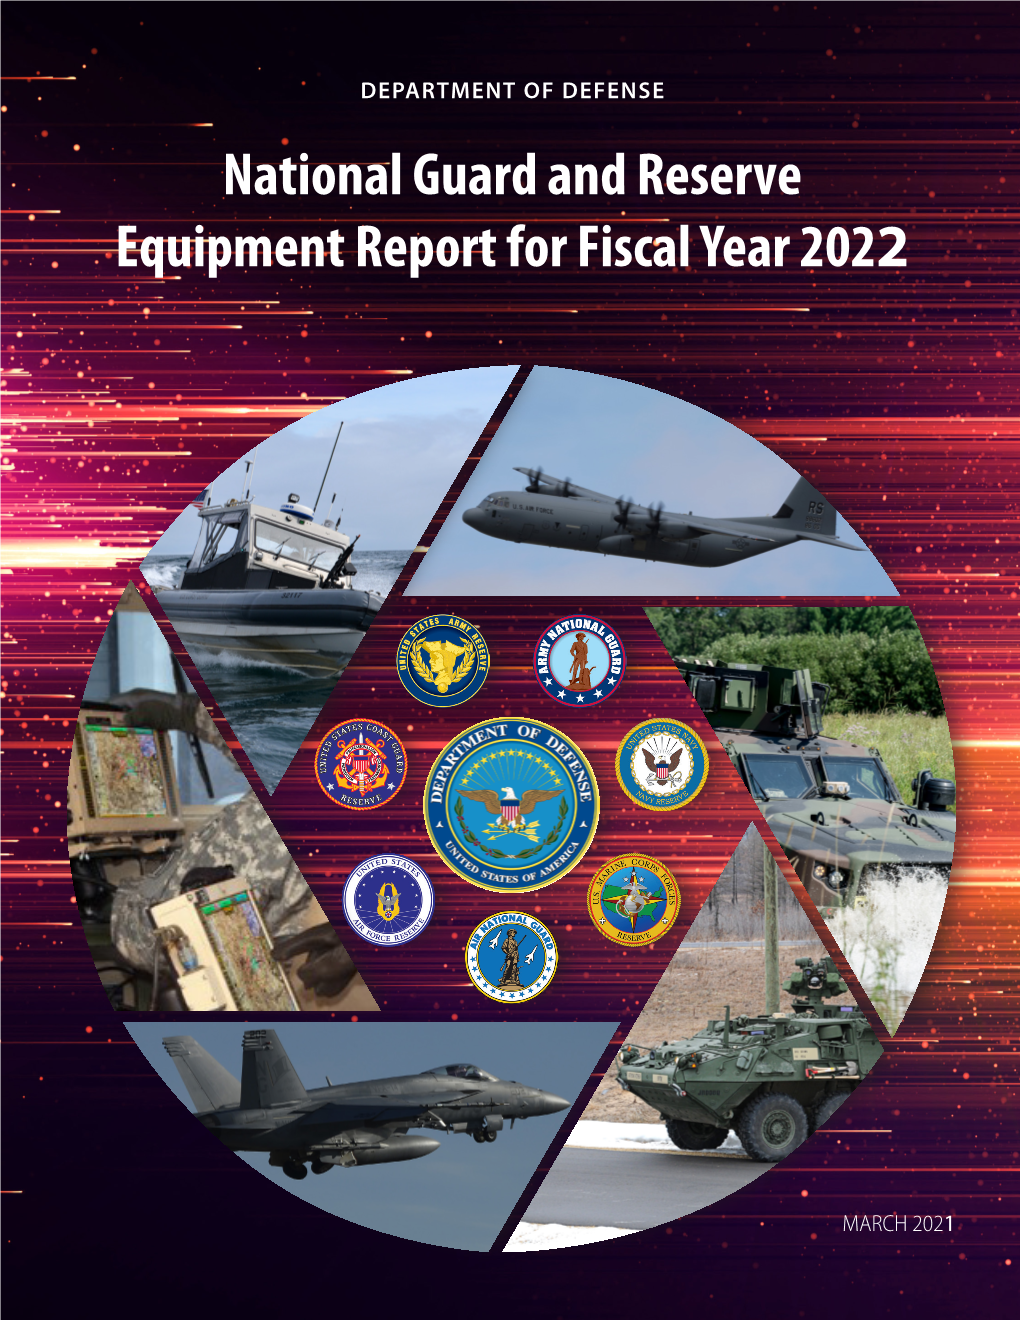 National Guard and Reserve Equipment Report for Fiscal Year 2022